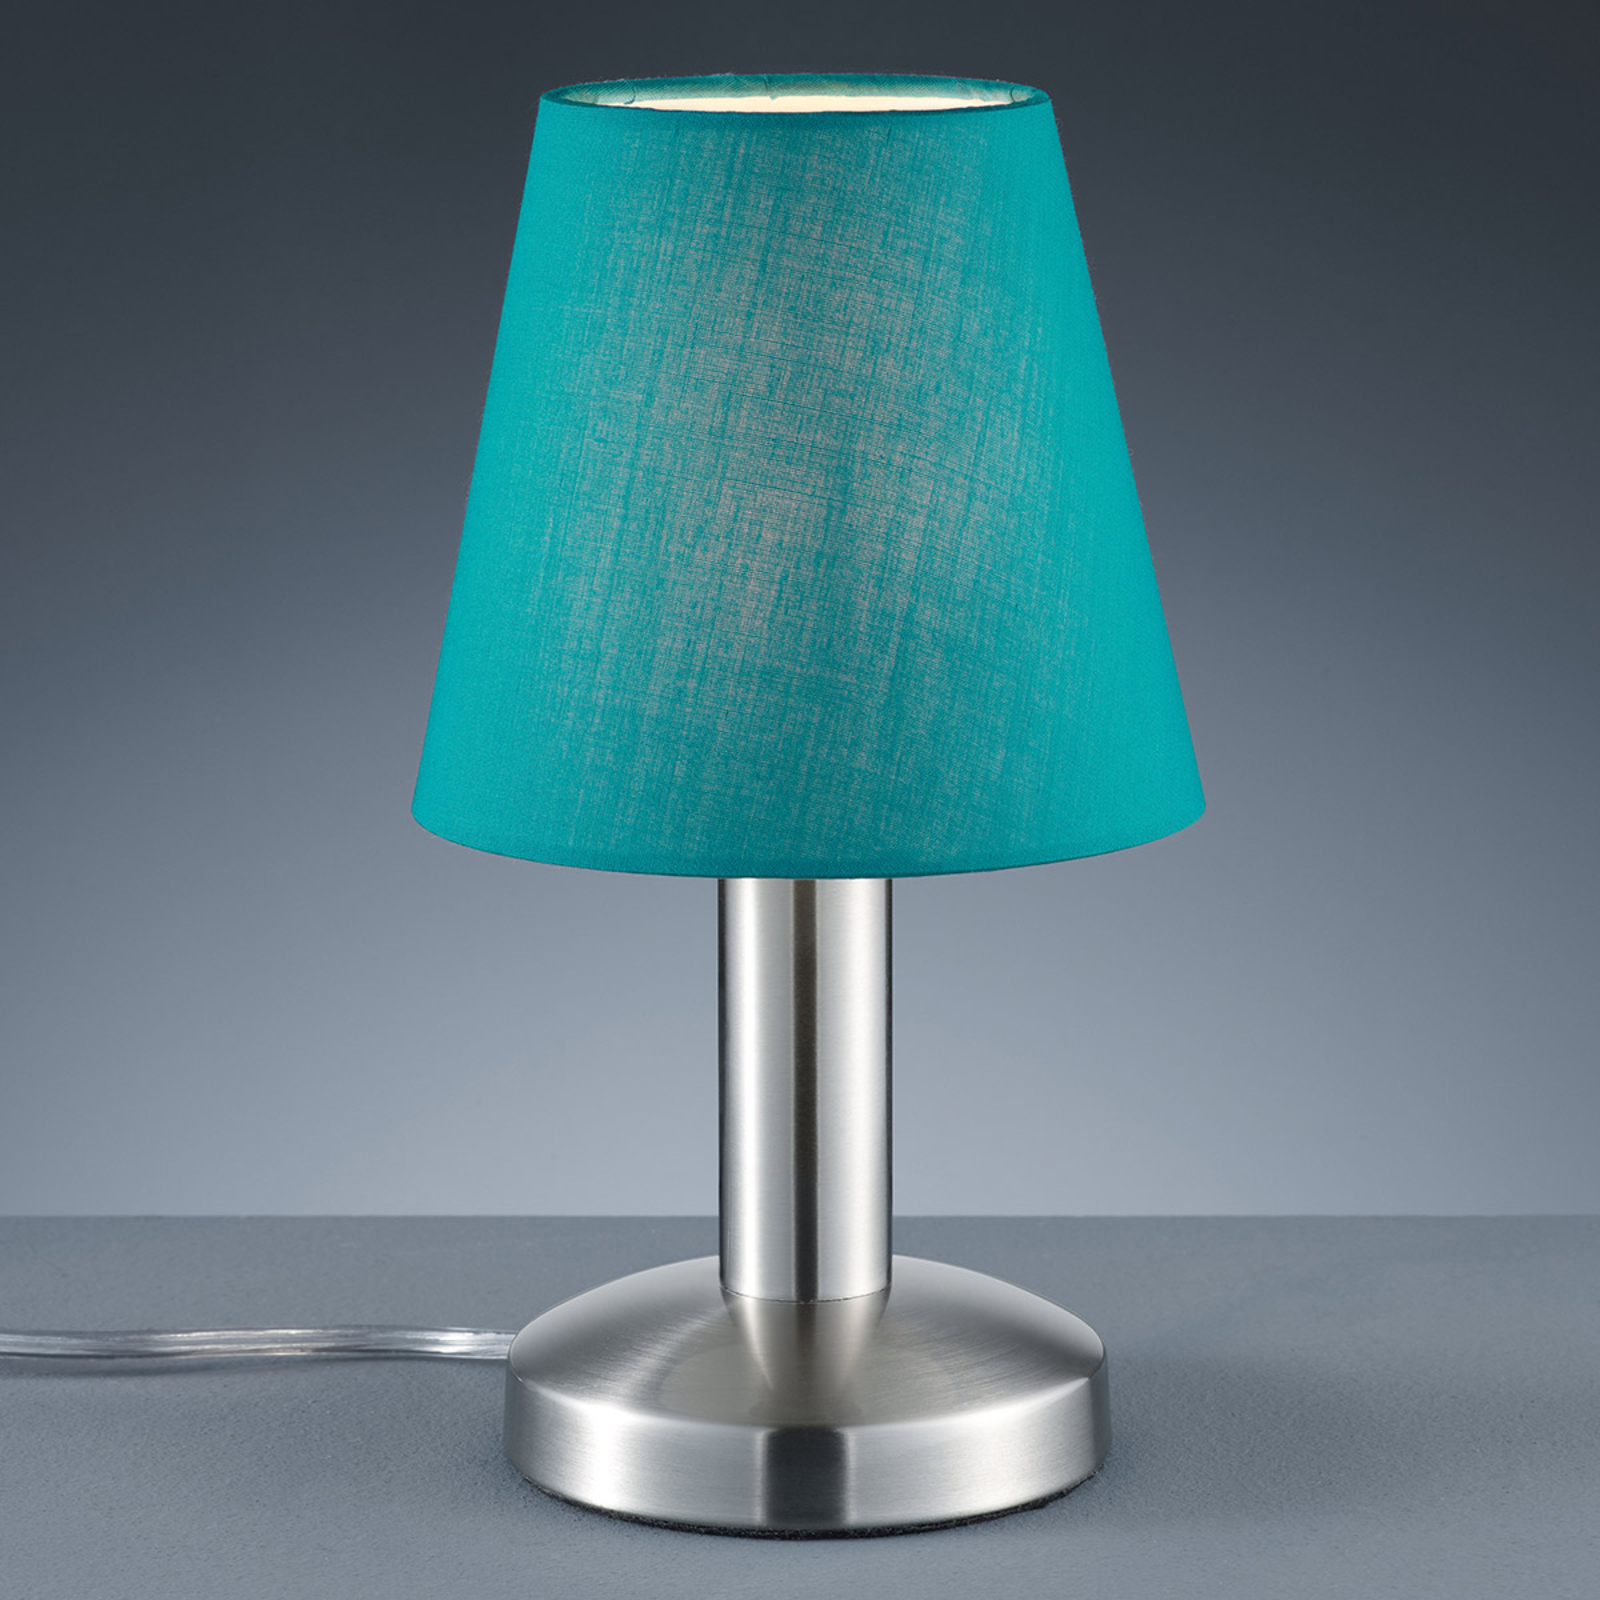 Merete Table Lamp With Touch Function, Turquoise Table Lamp Shades Uk